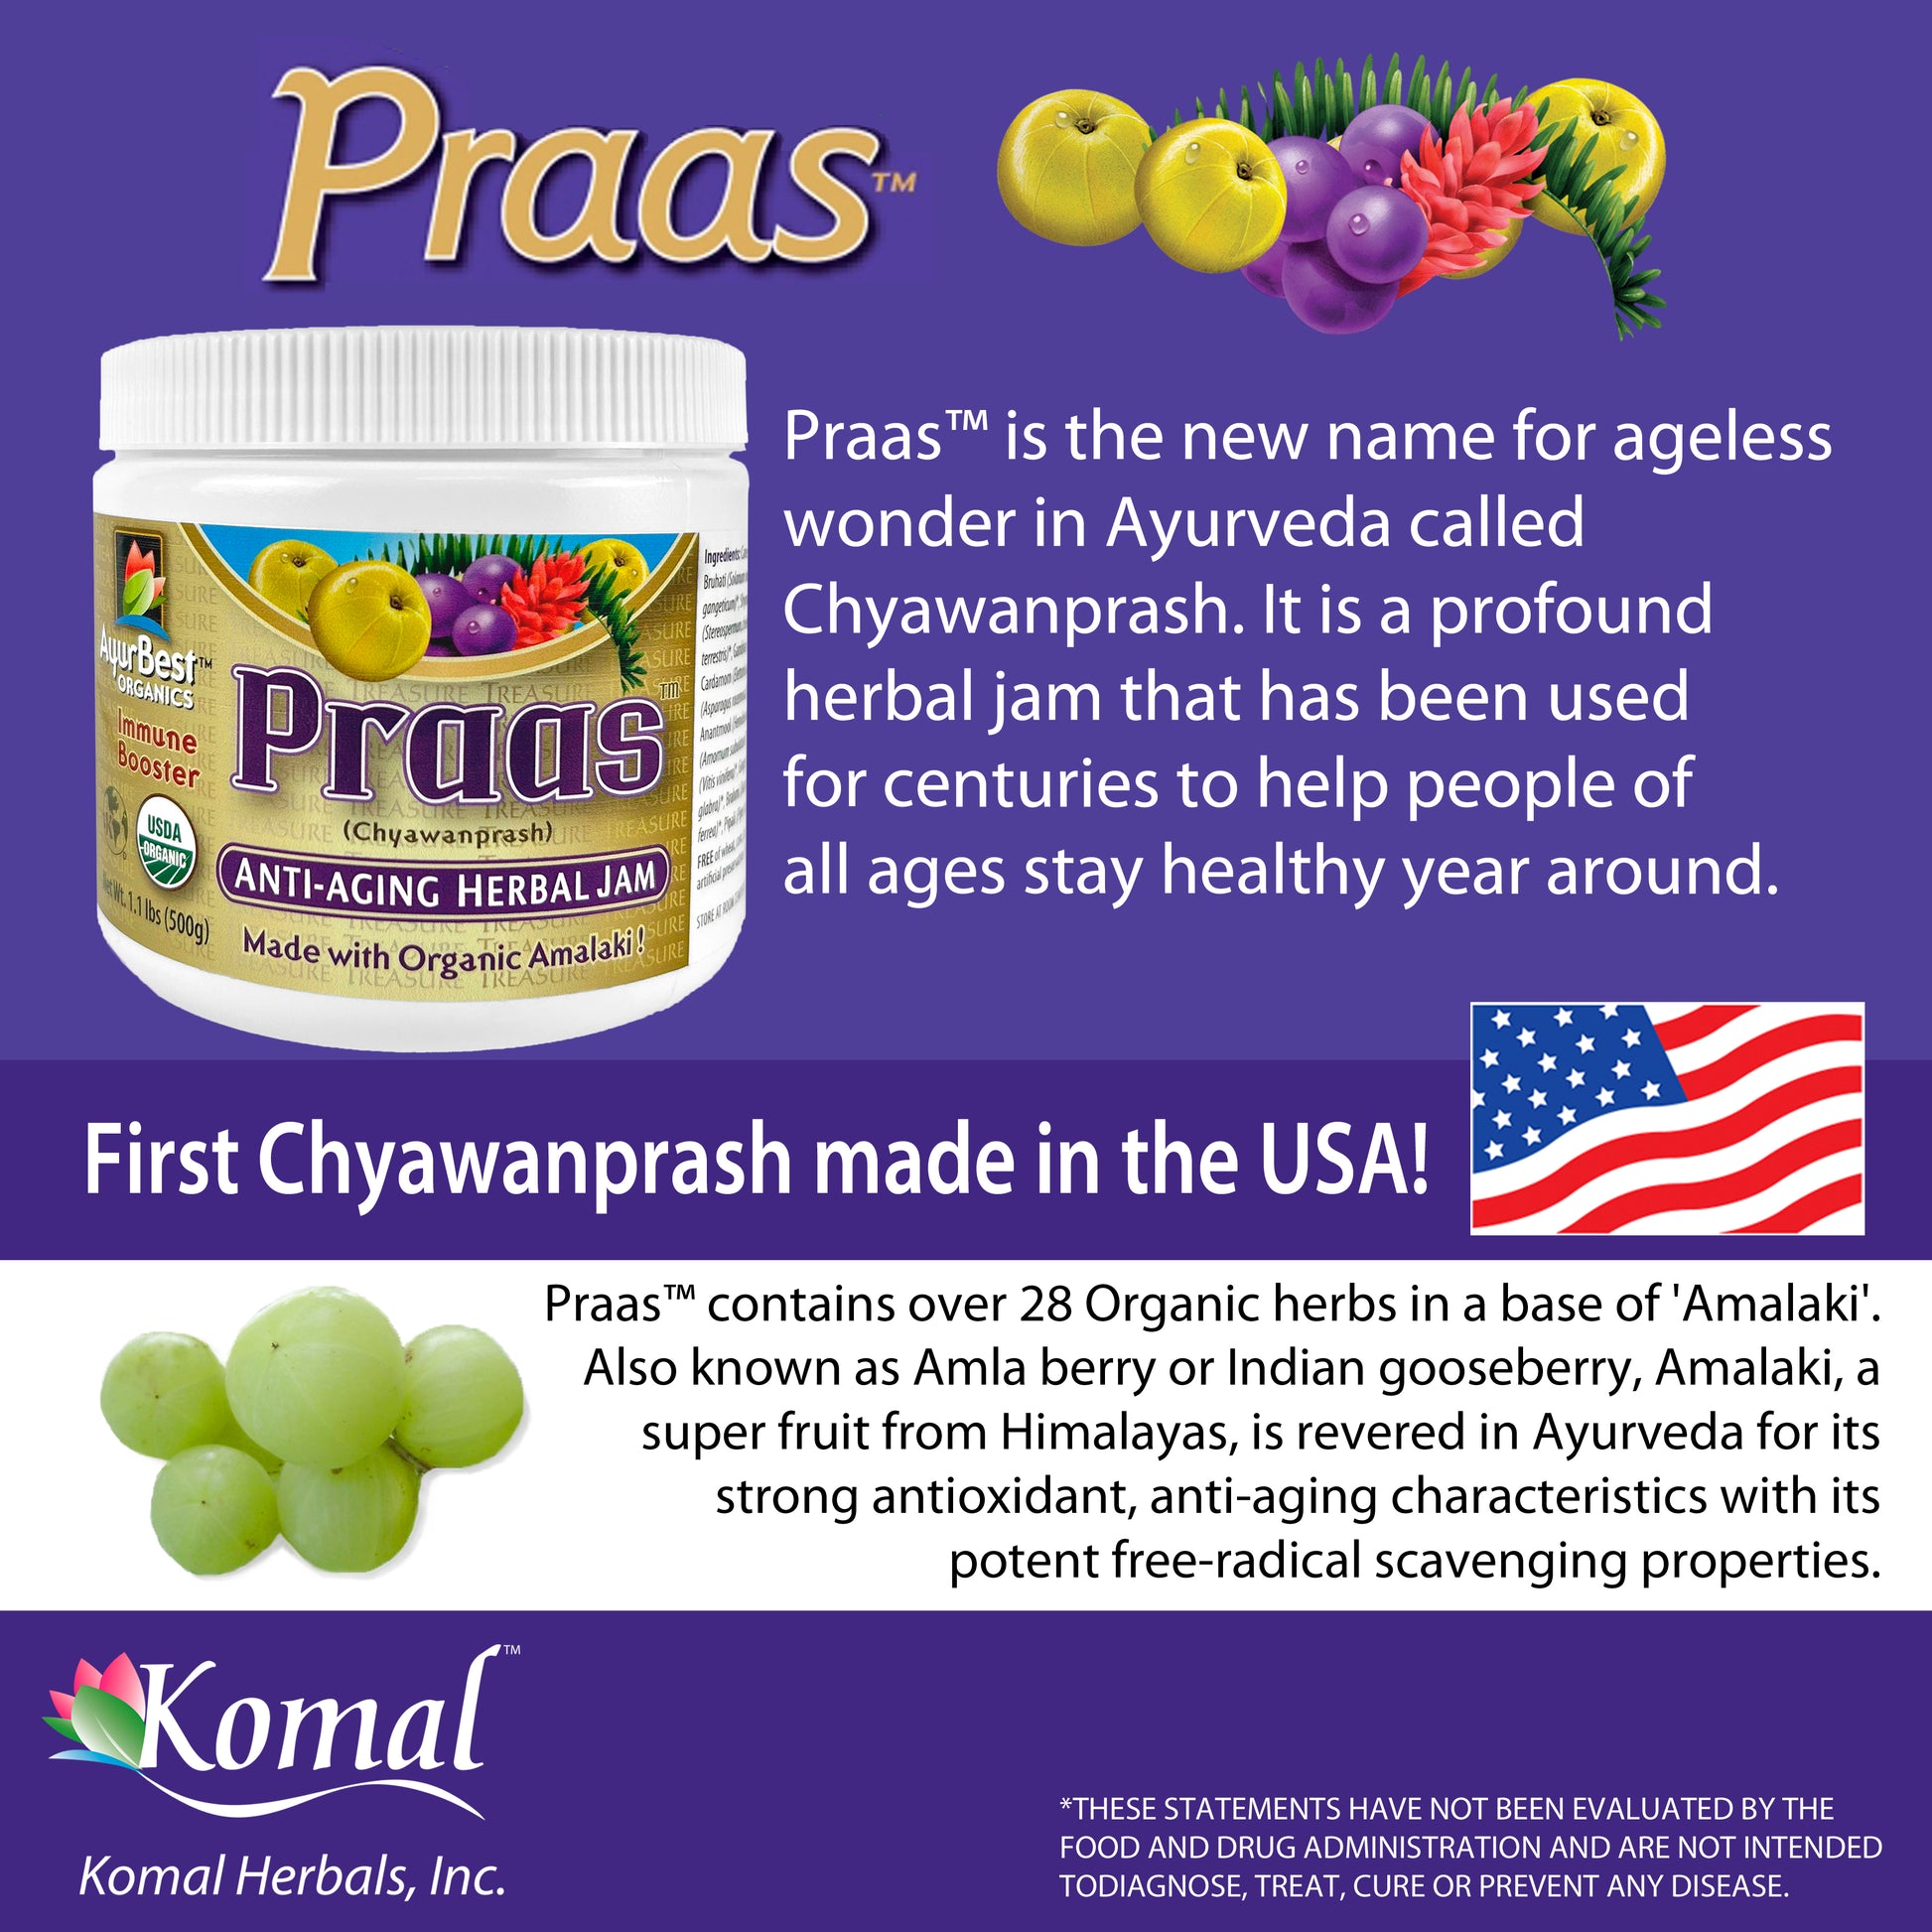 Praas is the new name for the ageless wonder Chywanprash, a profound herbal jam that helps boost your immune system.